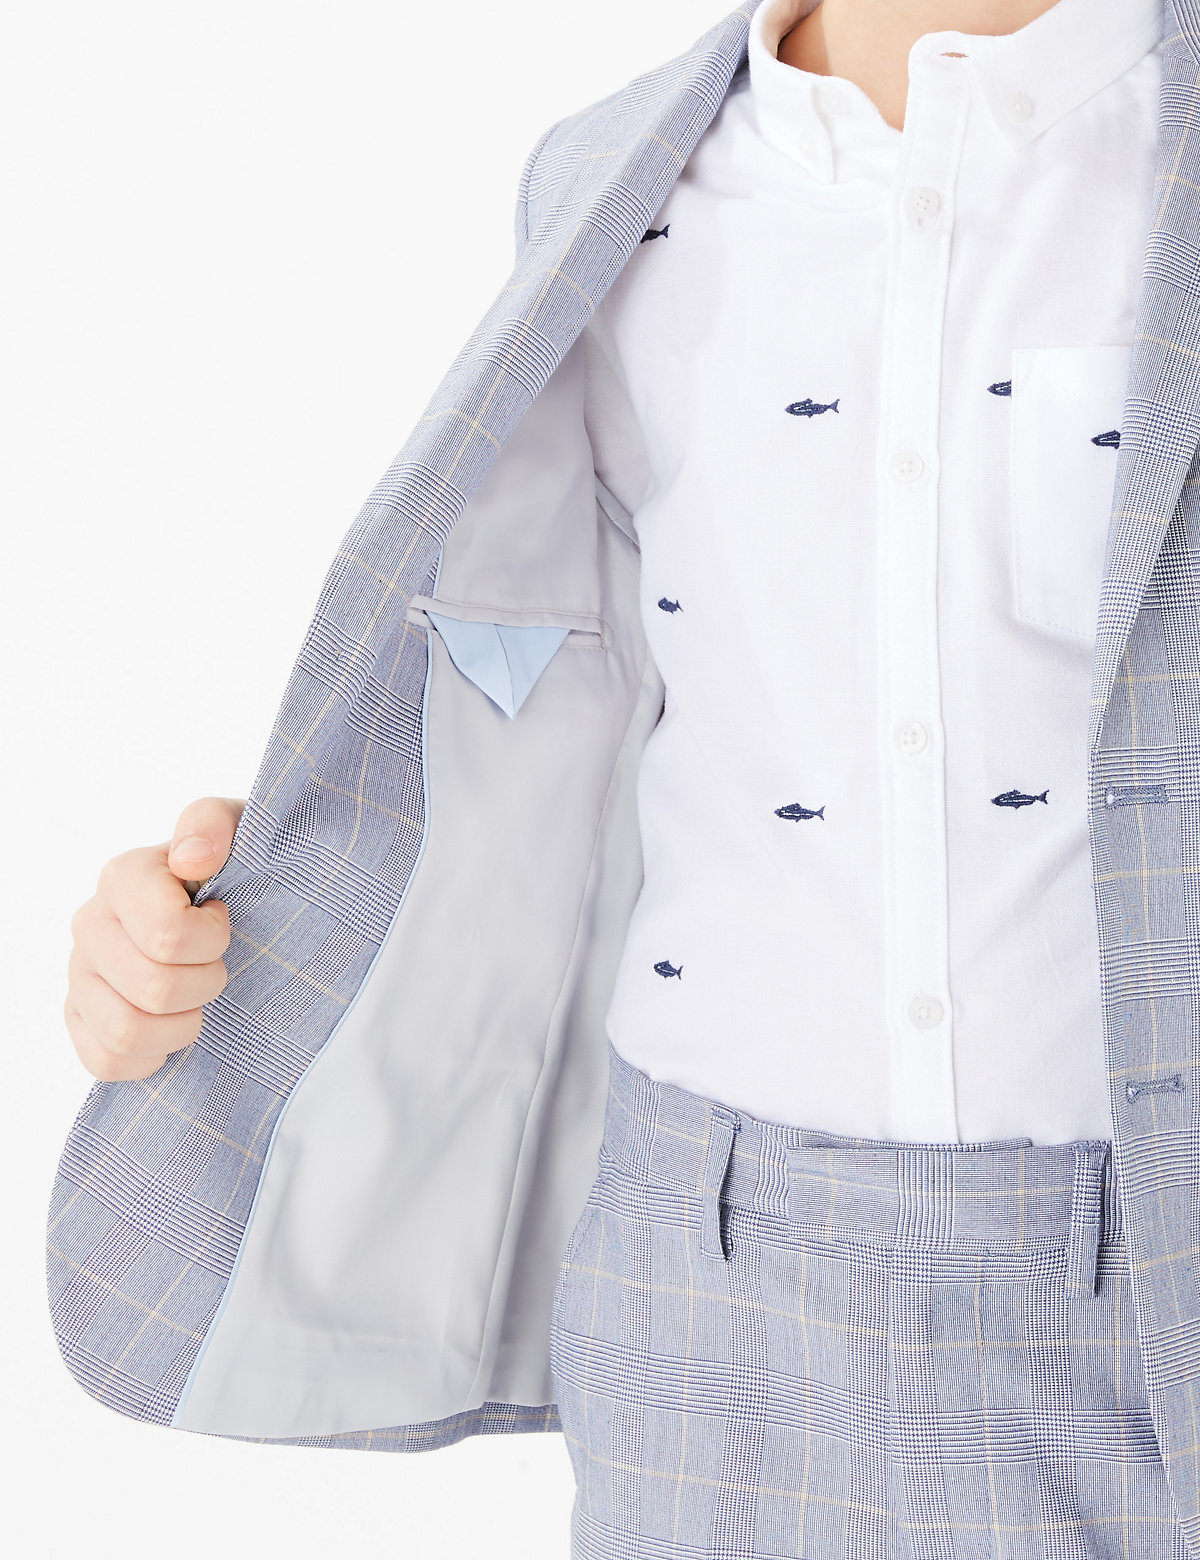 Checked Suit Jacket (2-16 Yrs)